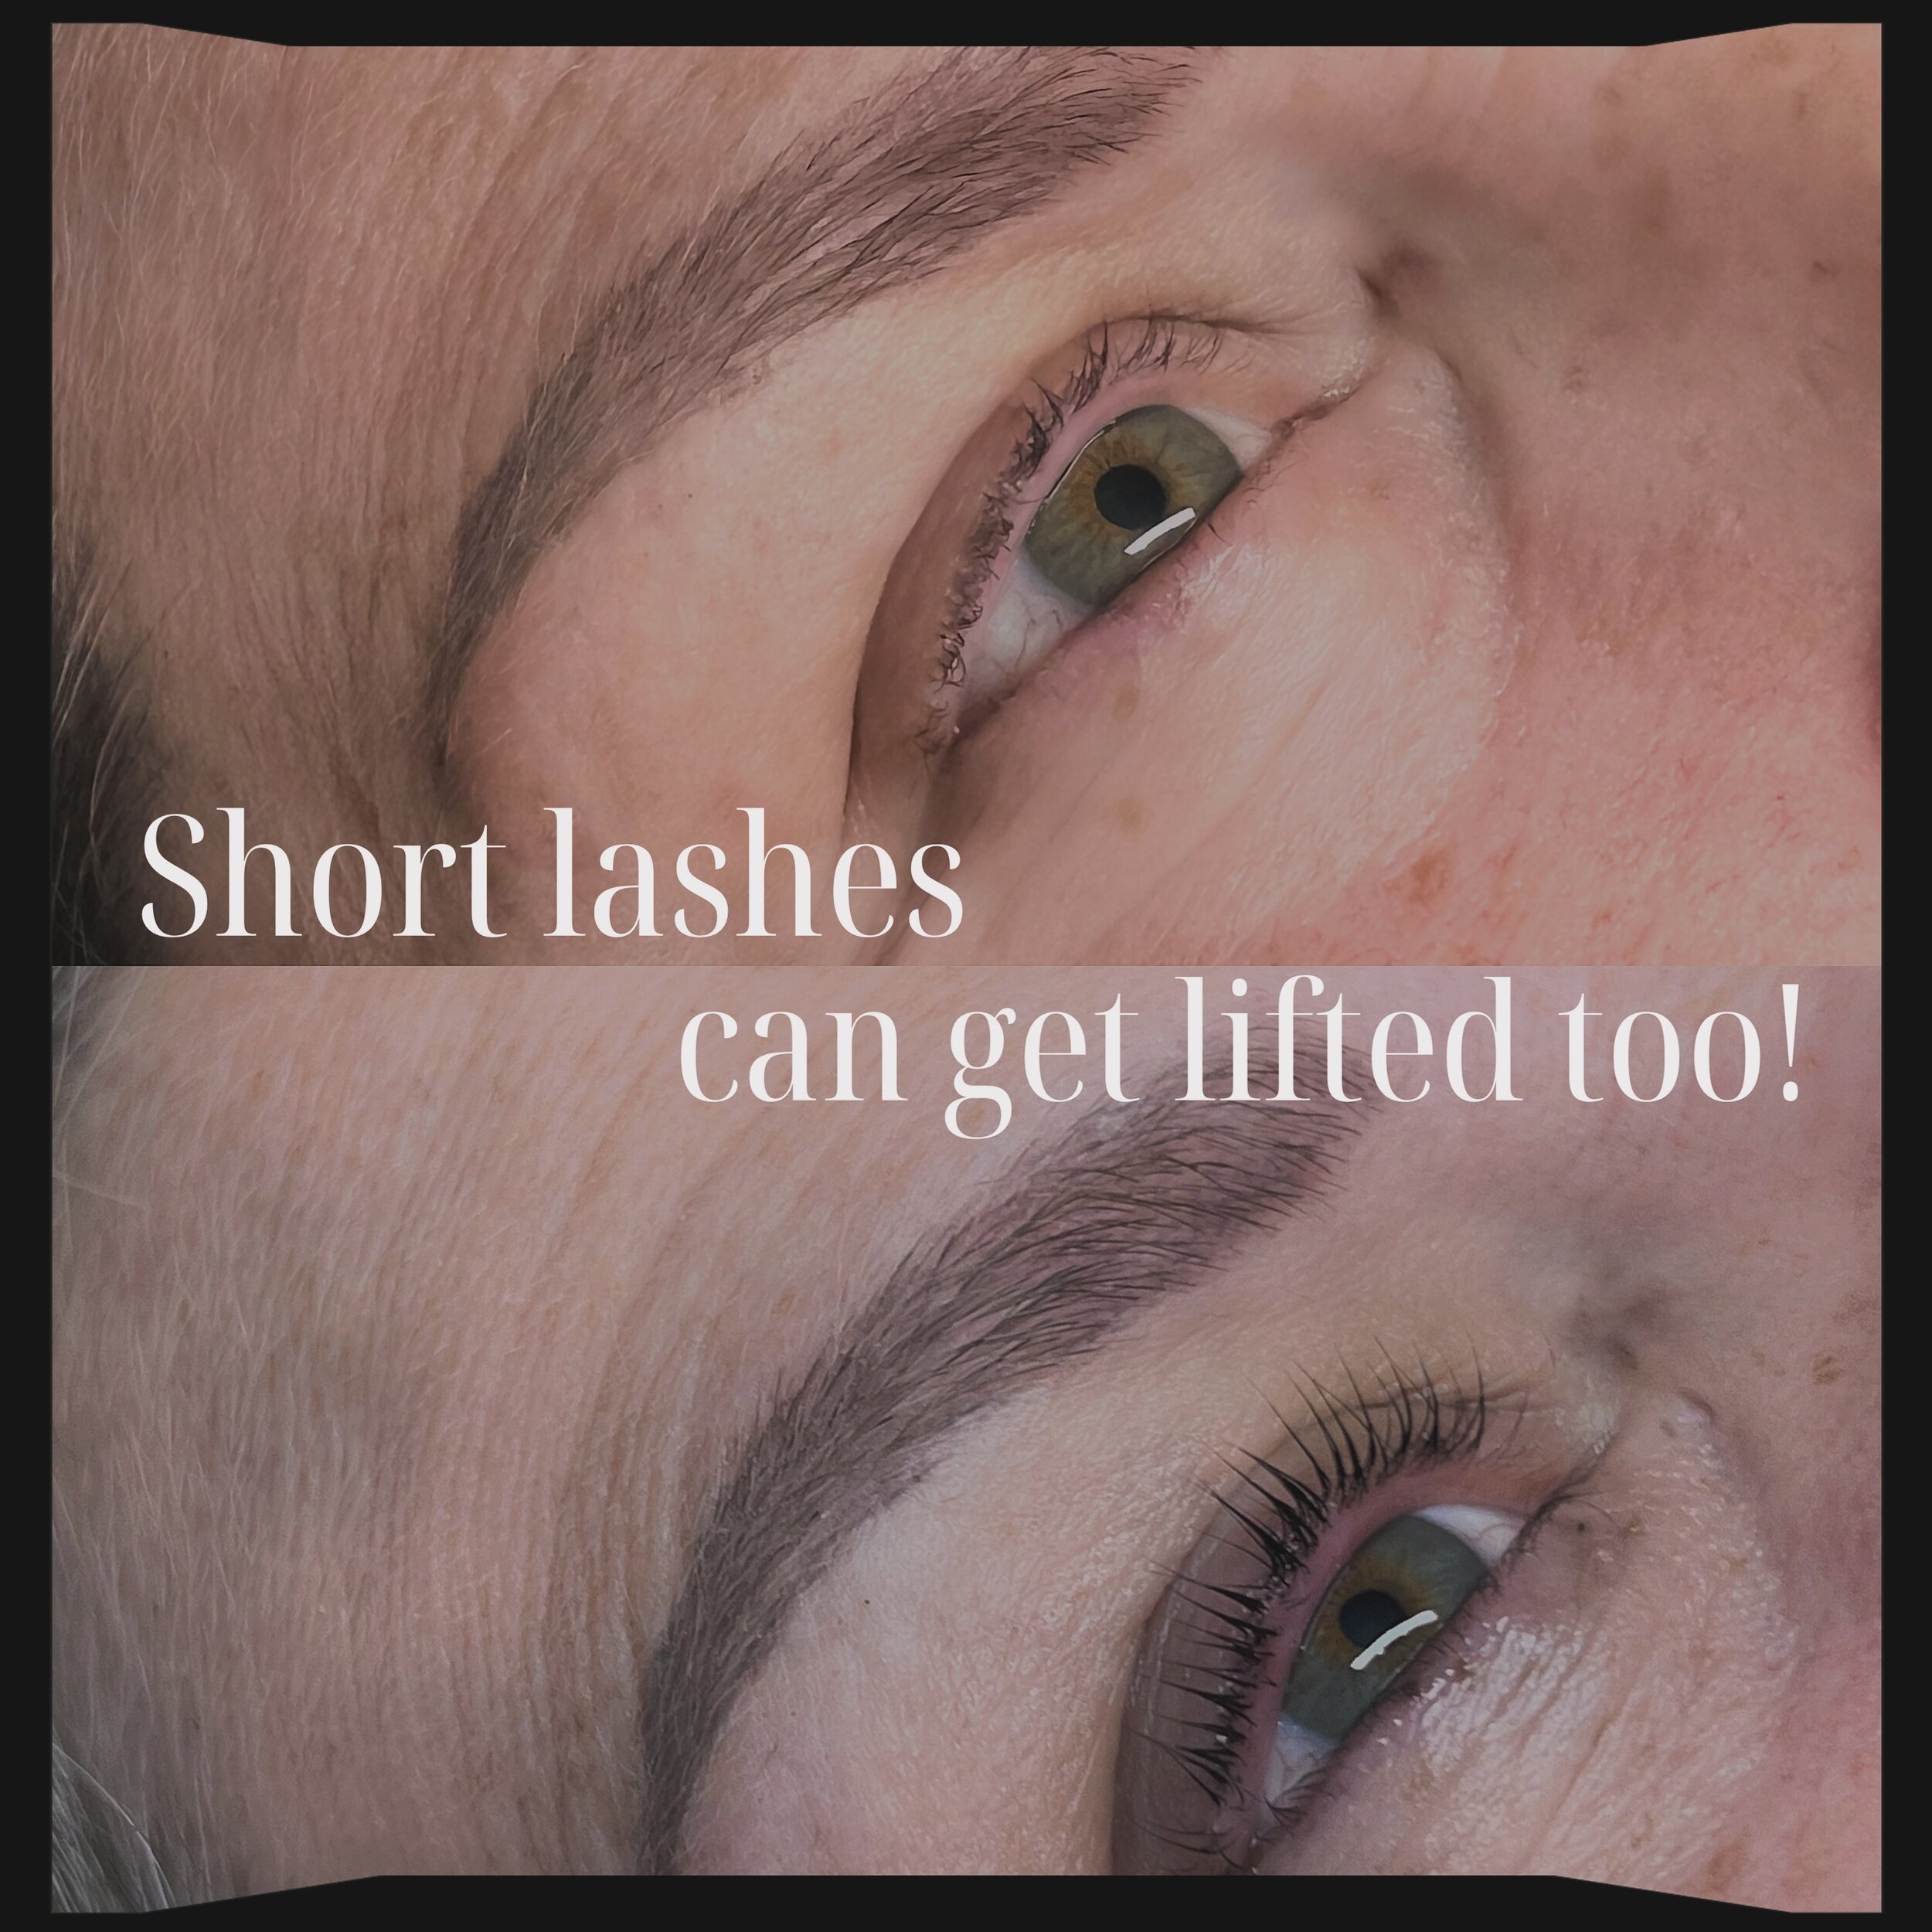 Yeah that's right.. SHORT LASHES CAN BE LIFTED TOO😊

Don't want the maintenance of lash extensions but still wish your natural lashes were just a little more dramatic? Then try a lash lift!! Makes your mascara stand out even more... I mean look at t